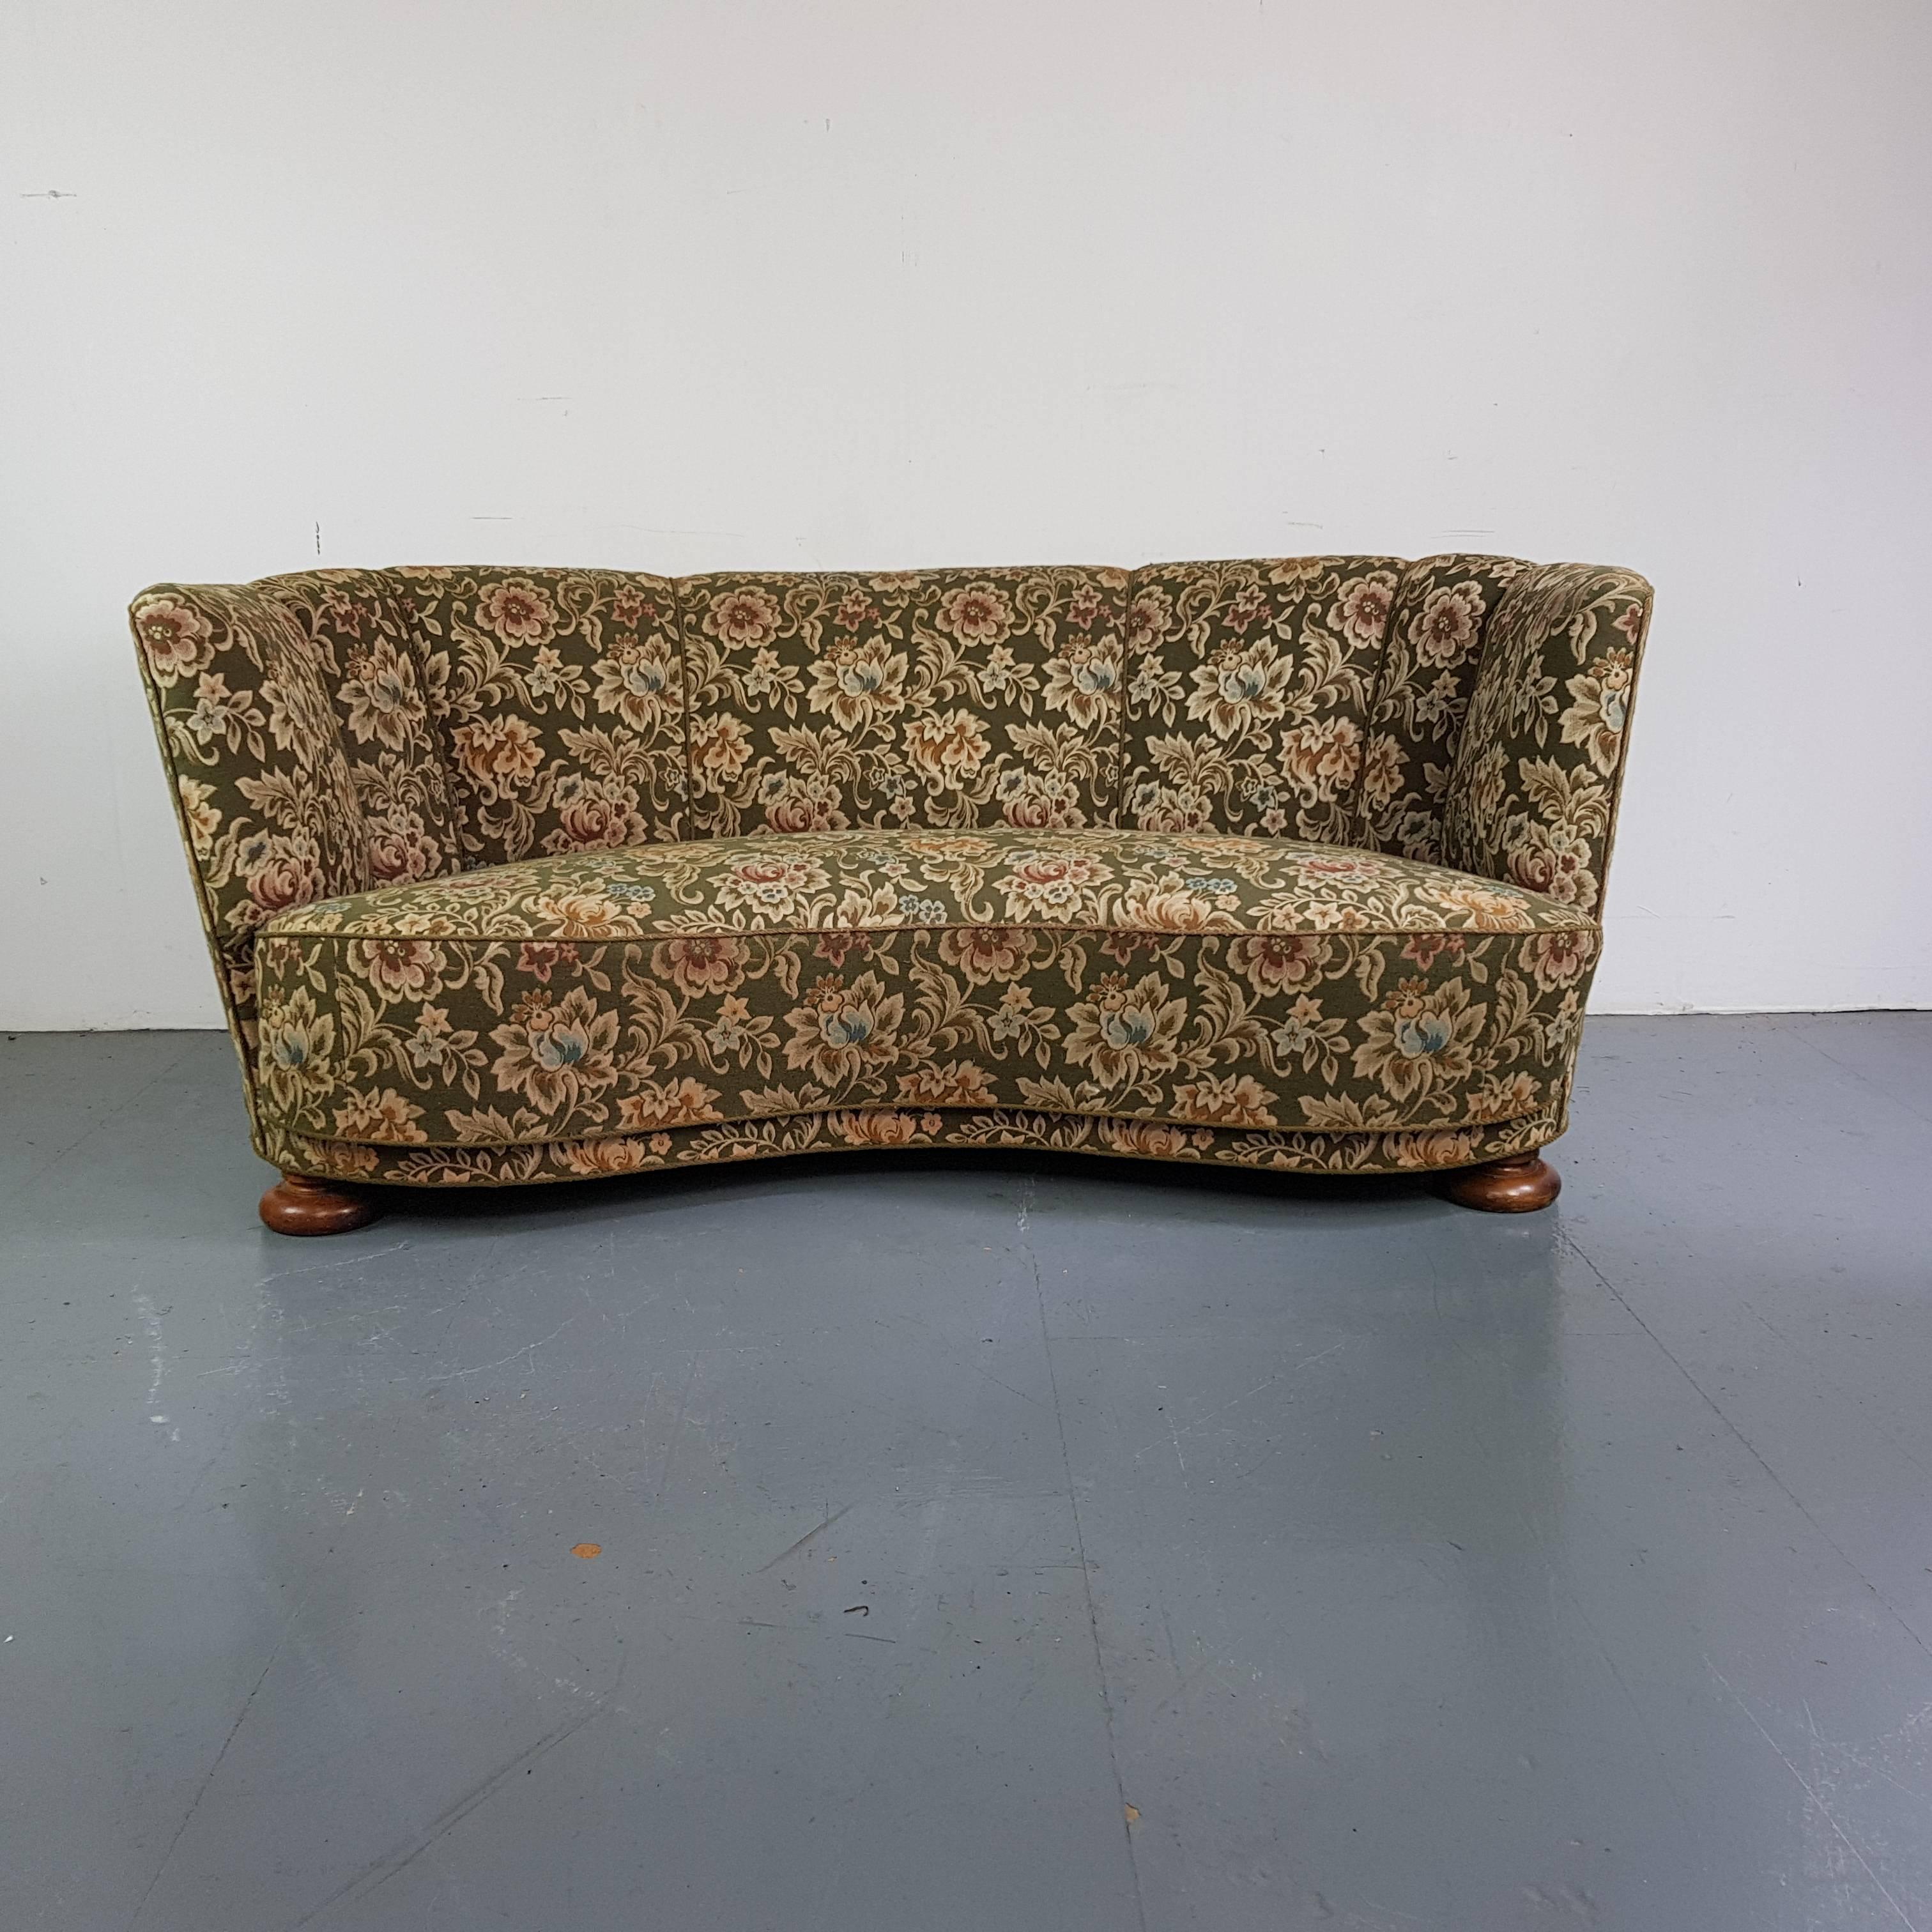 Lovely solid Danish curved Banana sofa upholstered in its original floral fabric, with beech feet.

Approximate dimensions:

Width: 179cm

Depth: 96cm

Height: 74cm.

Some wear, as to be expected in a vintage item, but nothing detrimental